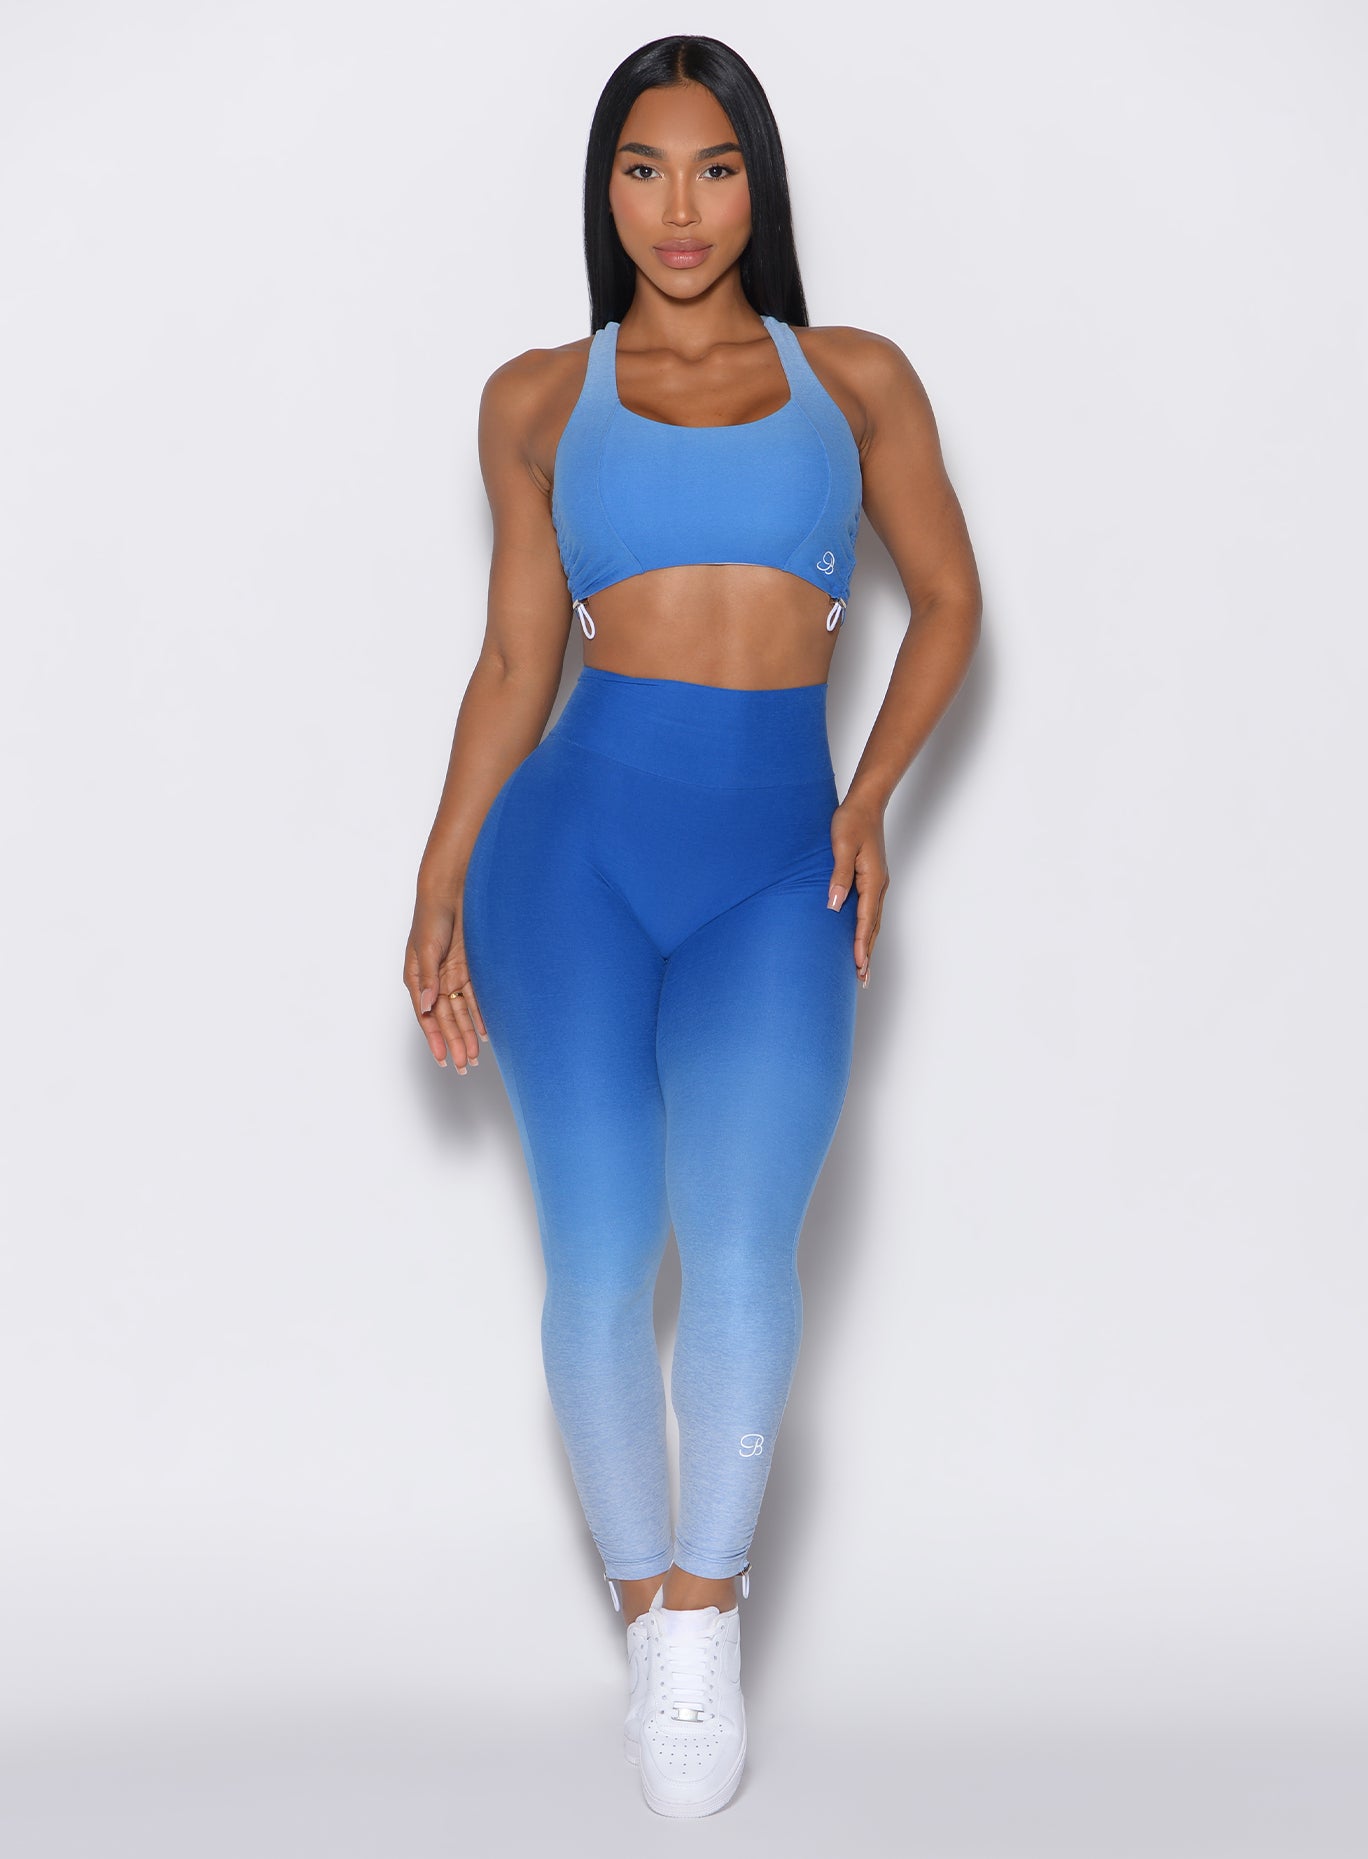 Front profile view of a model wearing our toggle leggings in Ombre Blue Crush color along with the matching sports bra 